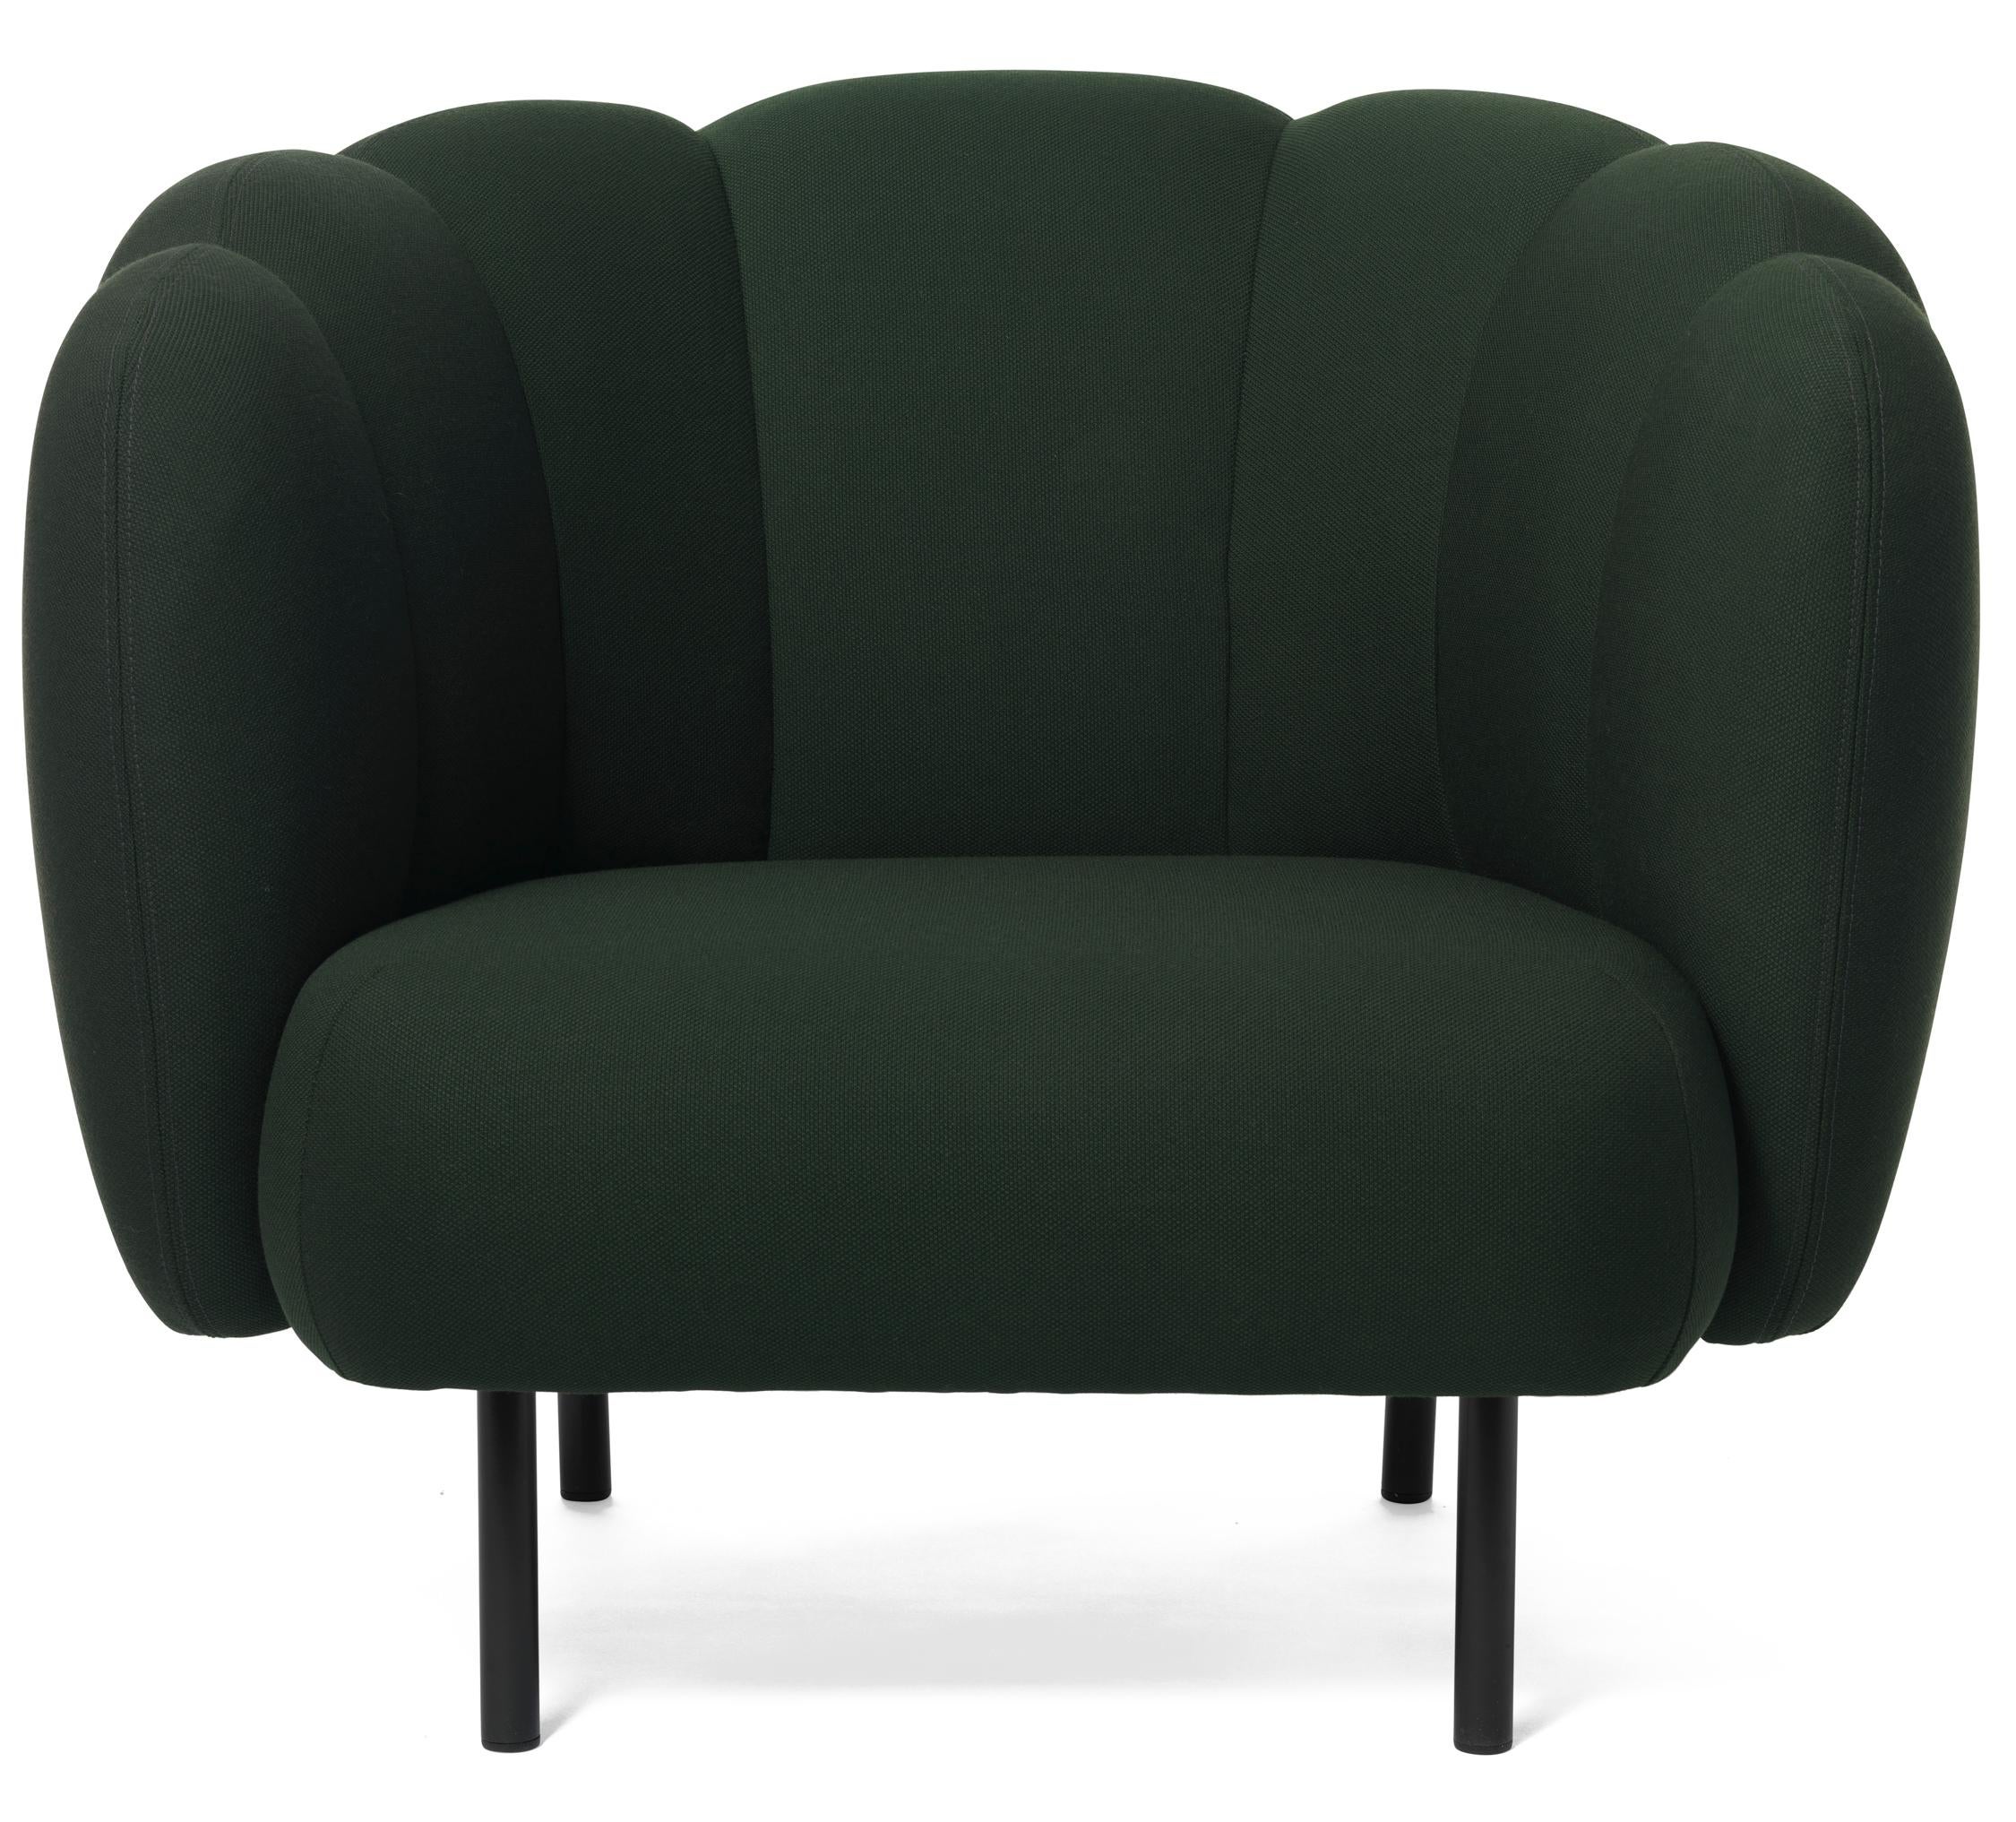 For Sale: Green (Steelcut 975) Cape Lounge Chair with Stitches, by Charlotte Høncke from Warm Nordic